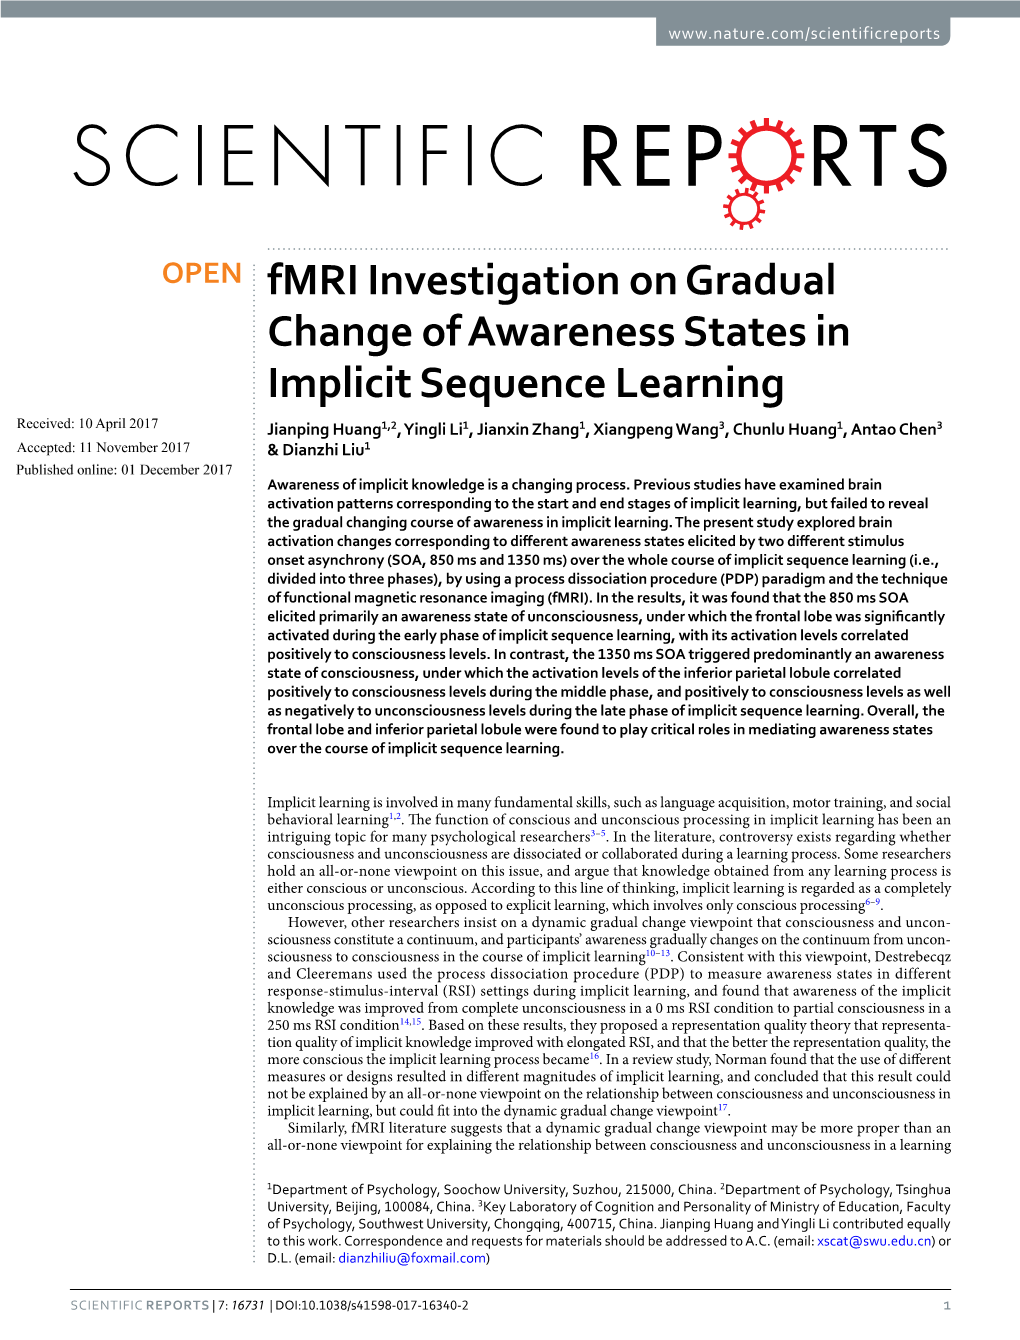 Fmri Investigation on Gradual Change of Awareness States in Implicit